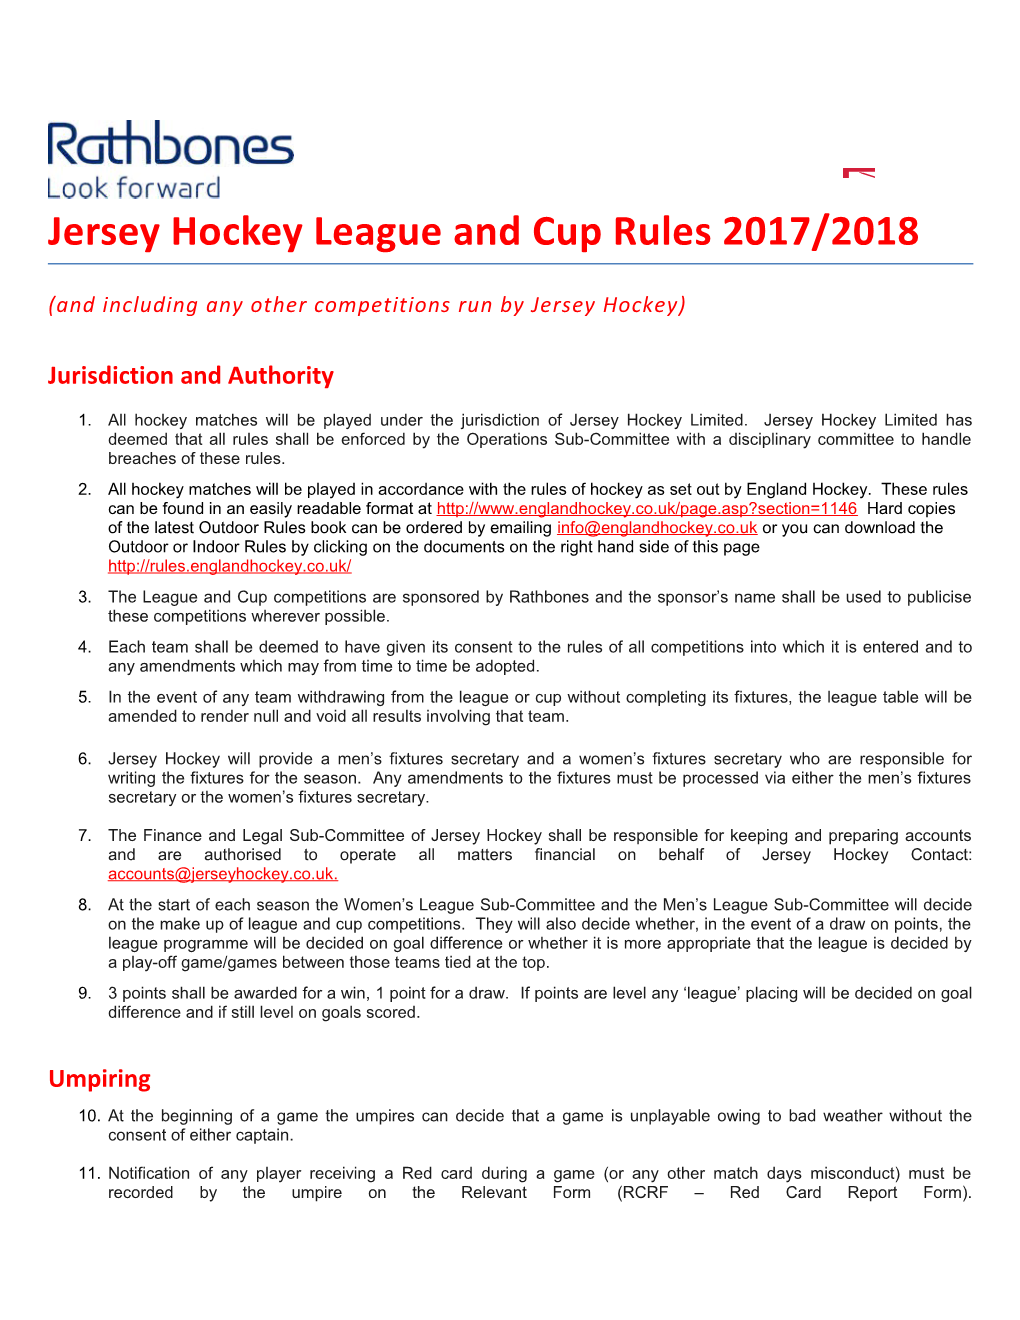 Jersey Hockey League and Cup Rules 2017/2018